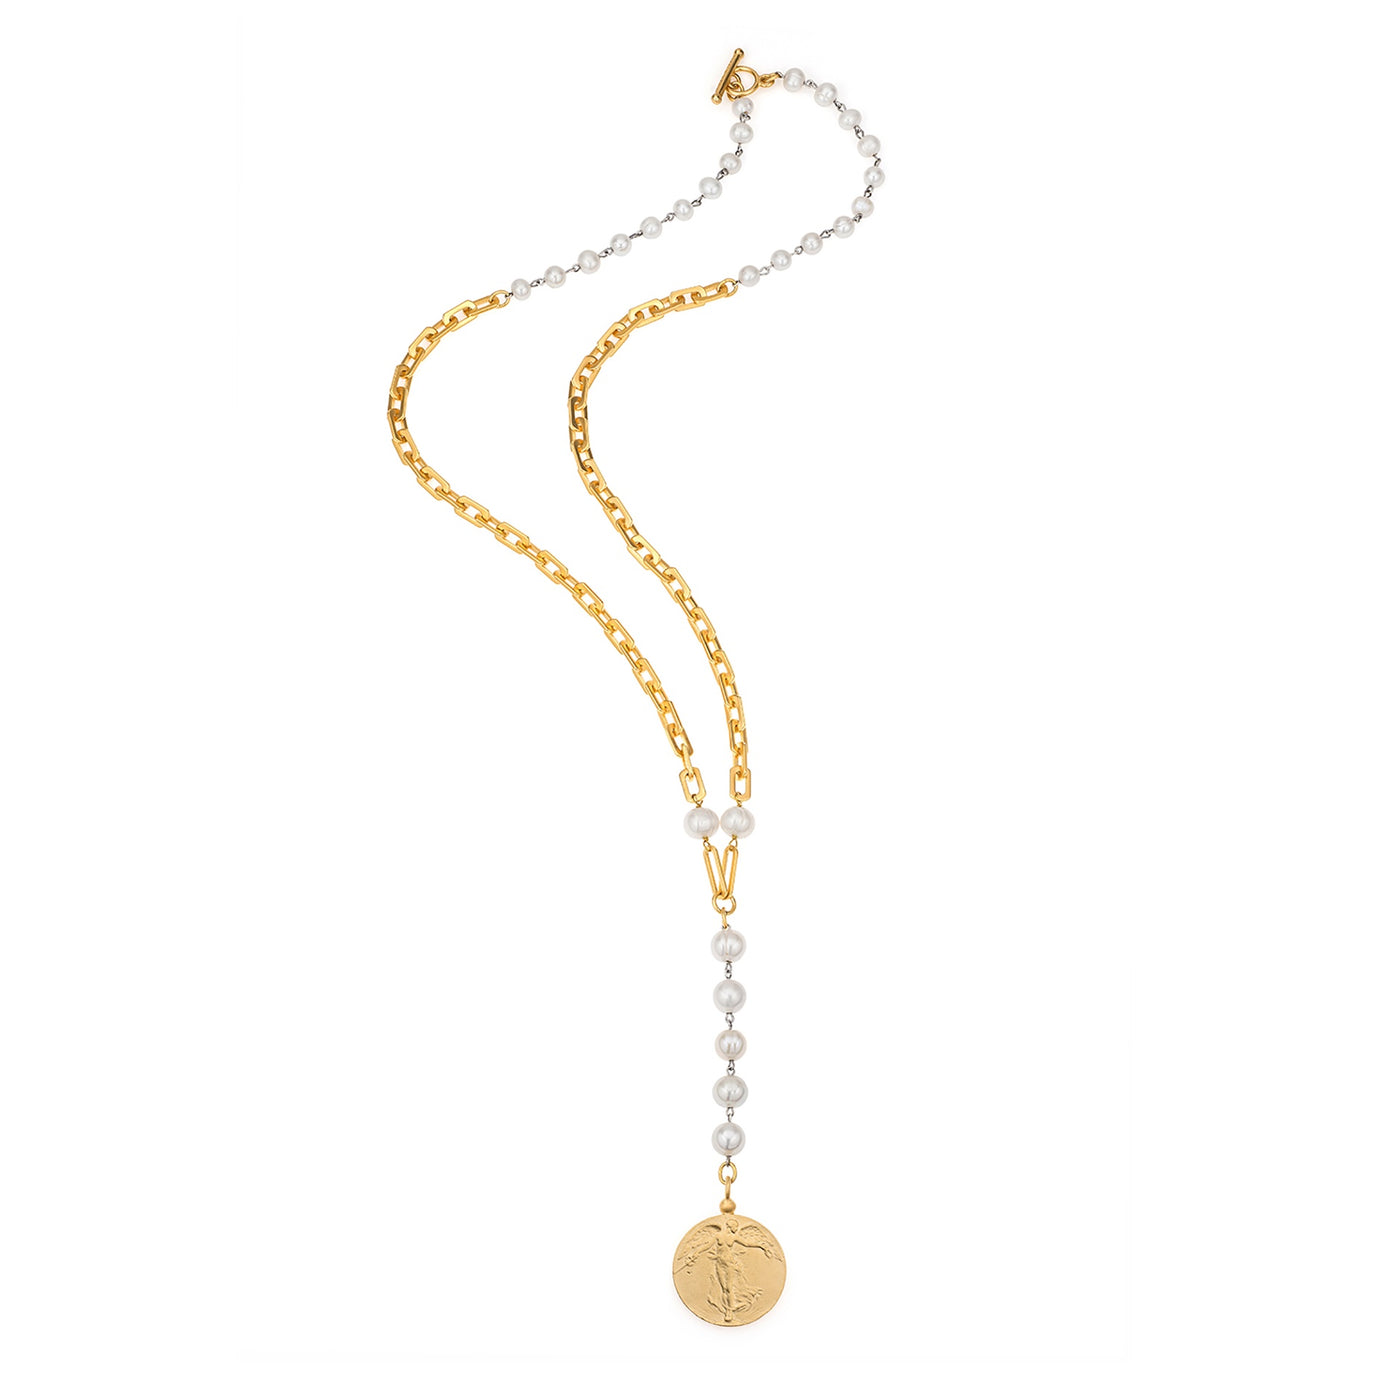 32" Pearl & 24k Gold Plated Chain Necklace with Medallion